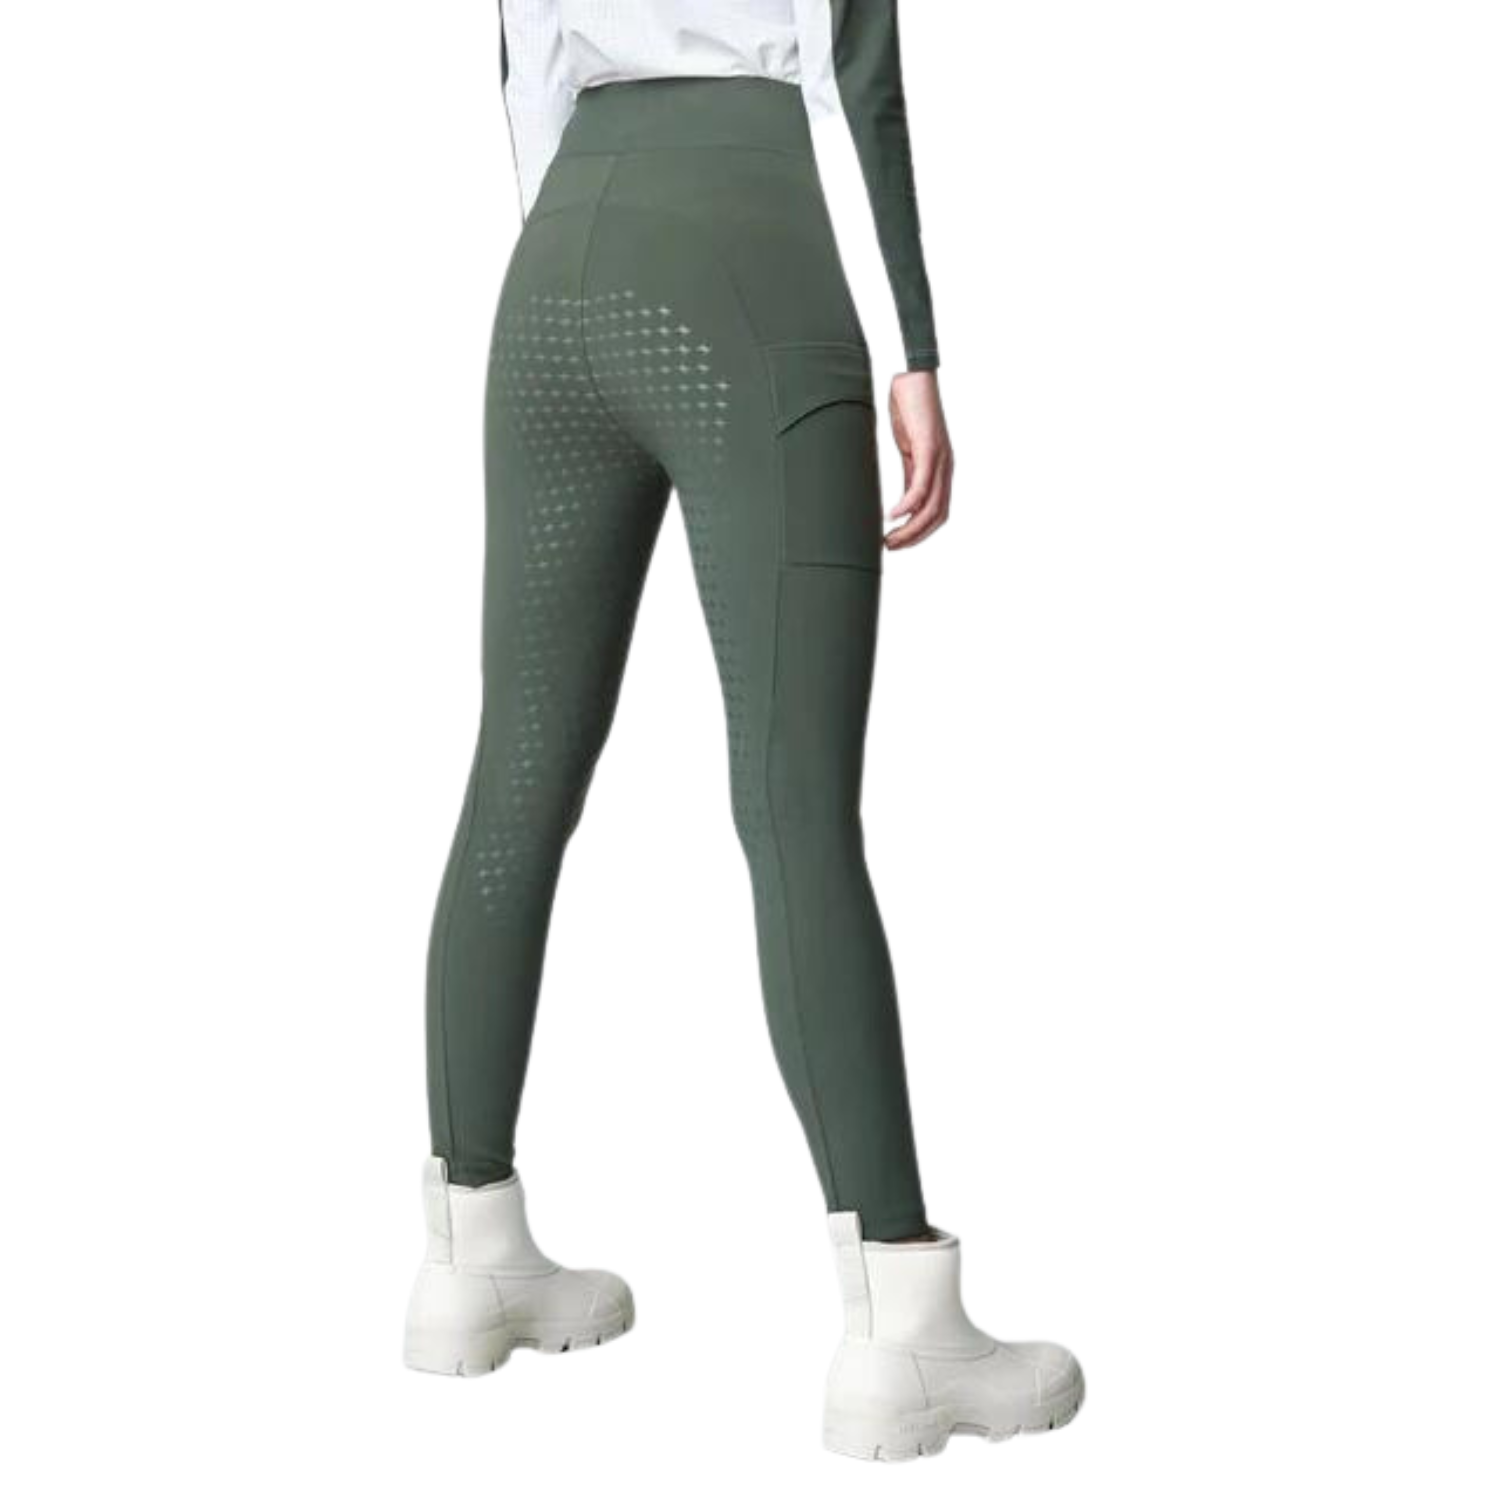 Ladies Compression Pull-On Knee Grip Breeches - Green